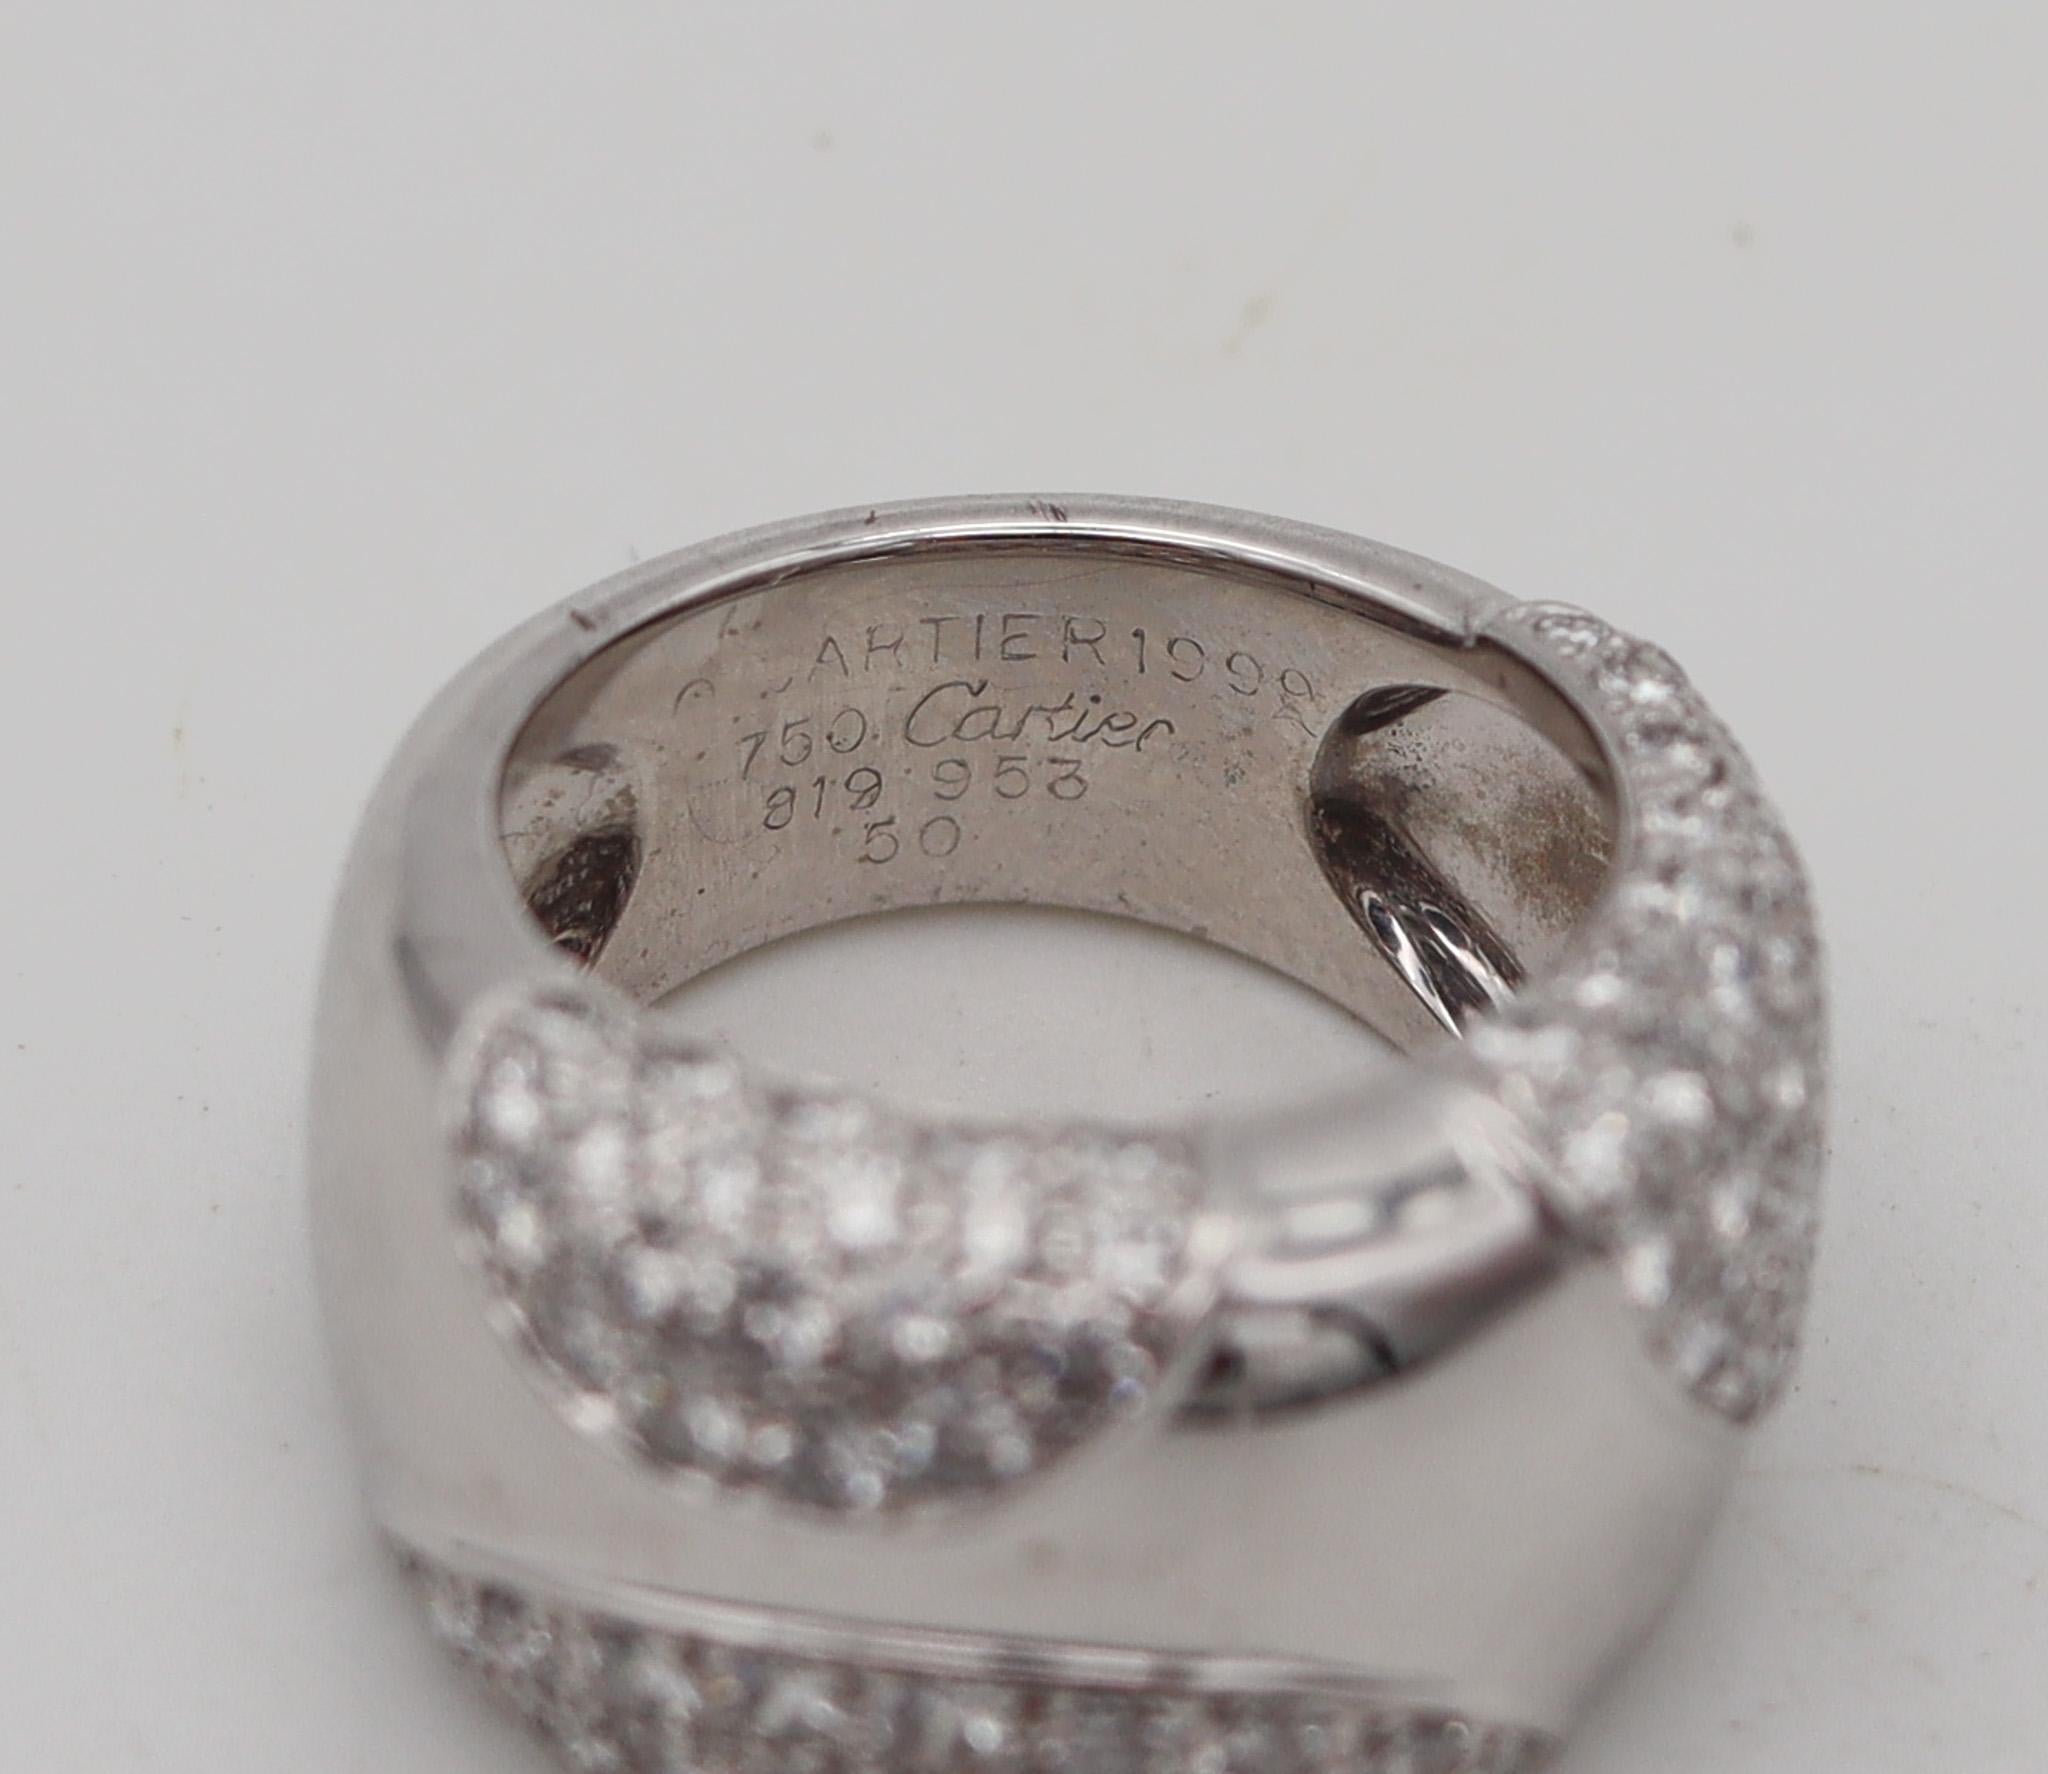 Brilliant Cut Cartier Paris Nouvelle Bague Ring In 18Kt White Gold With 2.76 Cts in Diamonds For Sale